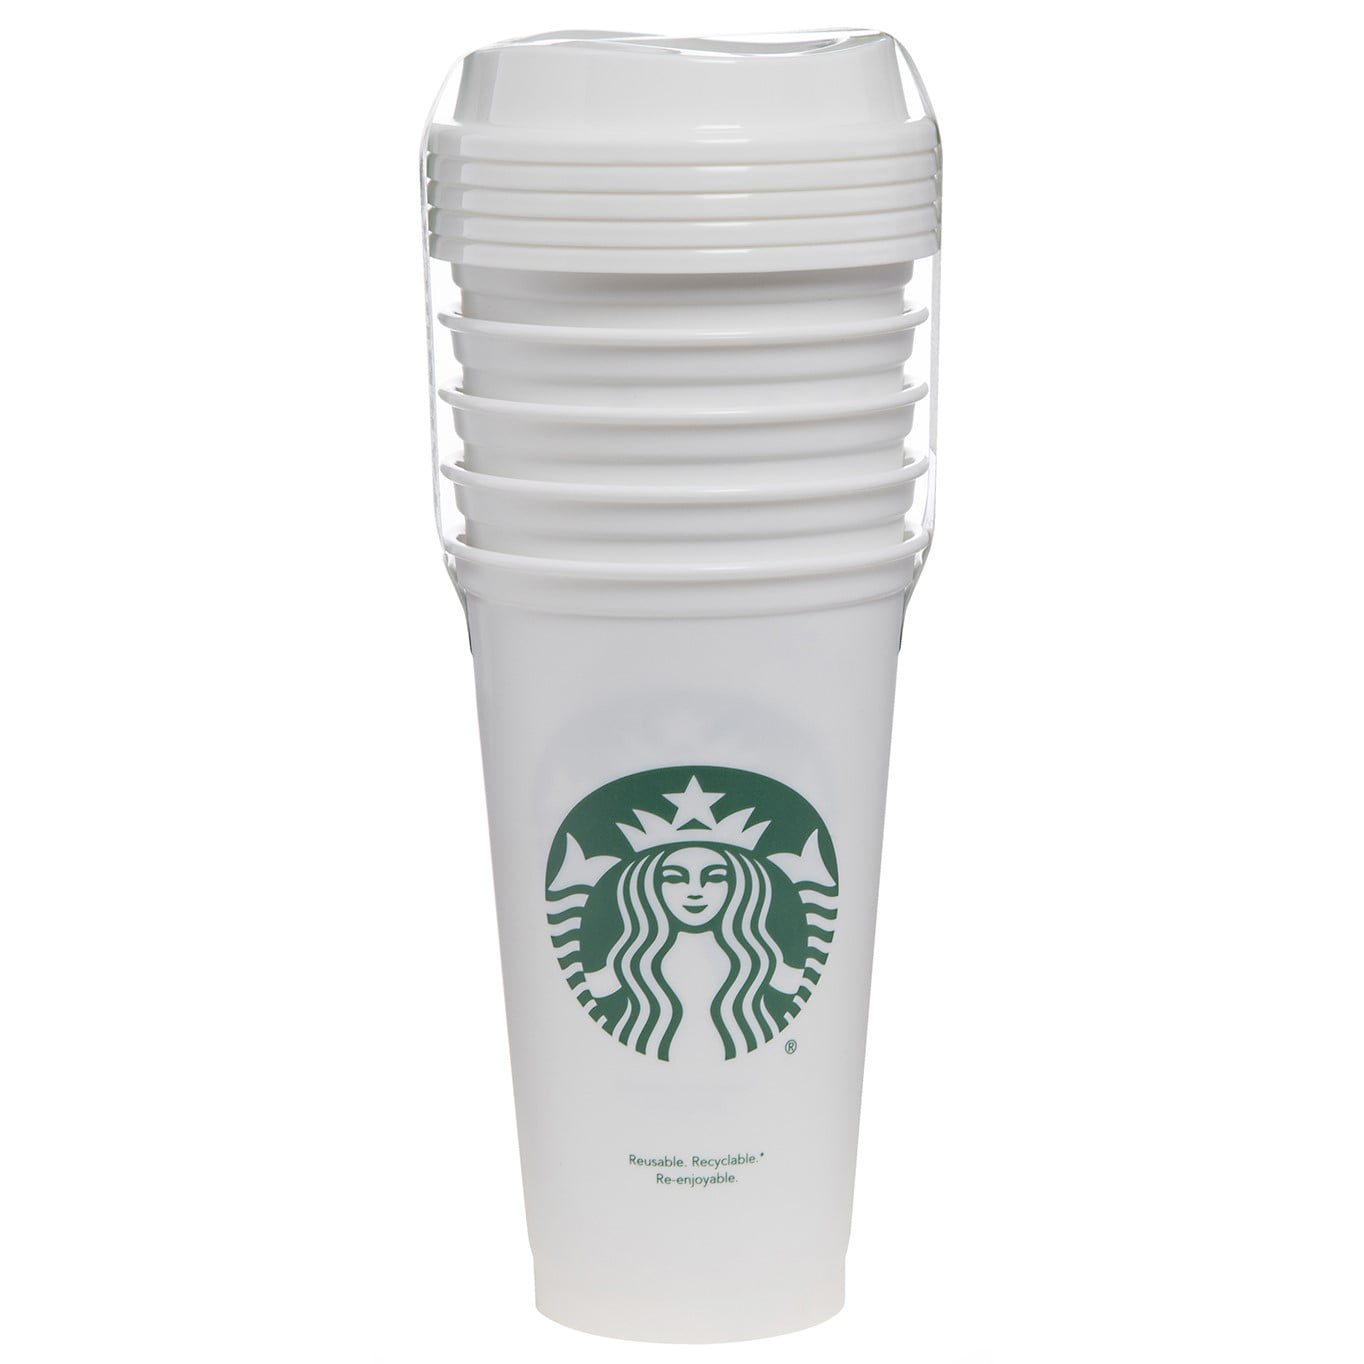 Starbucks 2019 Holiday Reusable White Cup Grande 16oz Merry Coffee 2 Pack 